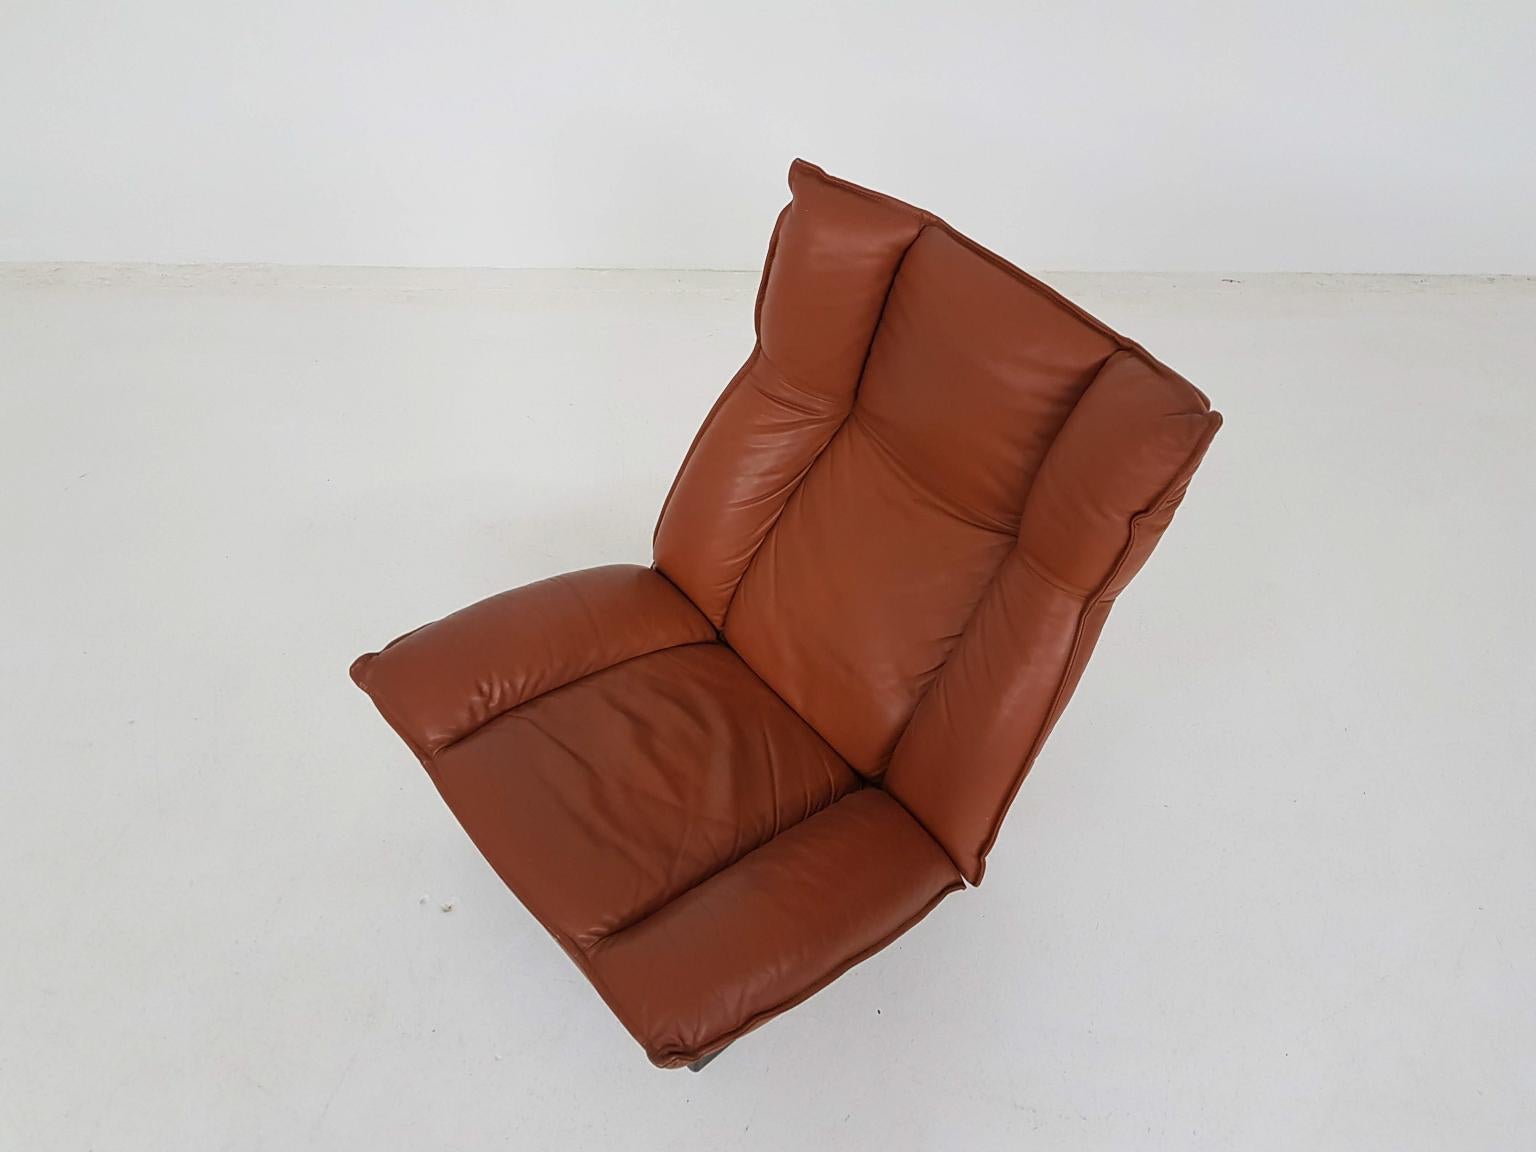 Leather and Wood Lounge Chair by Leolux, Dutch Modern Design, 1970s 2